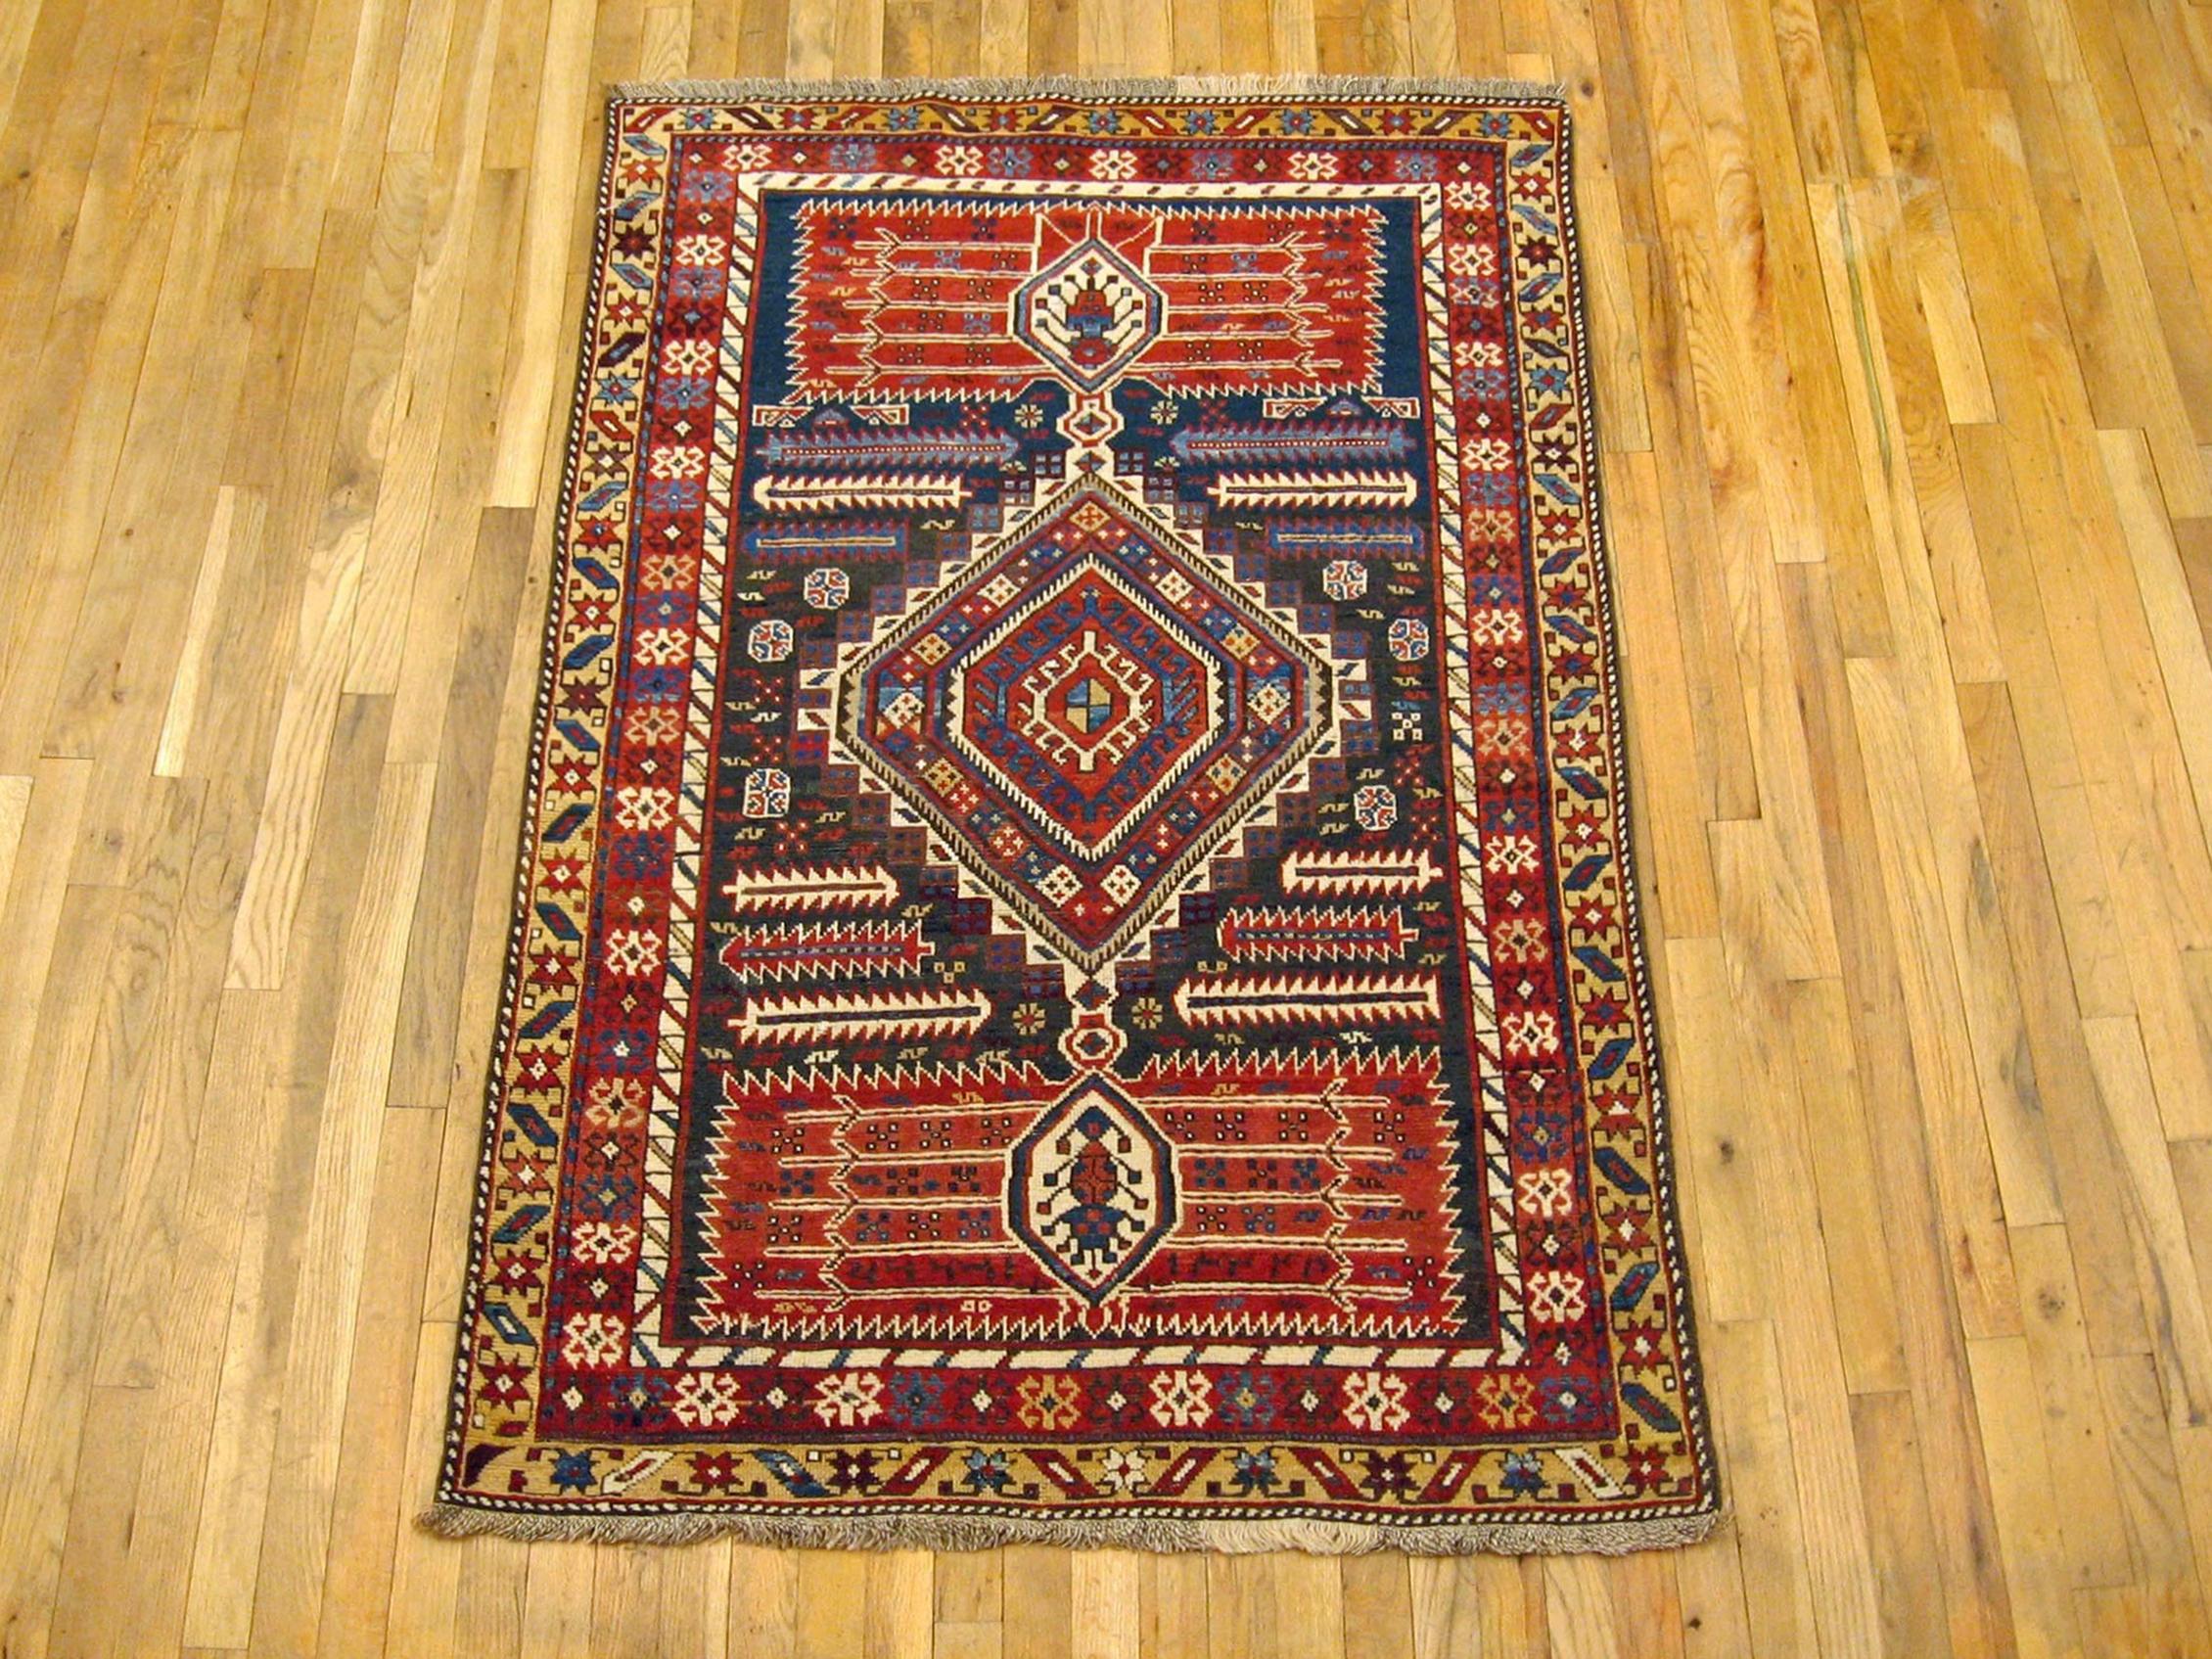 Antique Caucasian Shirvan rug, small size, circa 1900.

A one-of-a-kind antique Caucasian Shirvan Oriental Carpet, hand-knotted with soft wool pile. This lovely hand-knotted wool rug features a central medallion on the brown primary field, with an